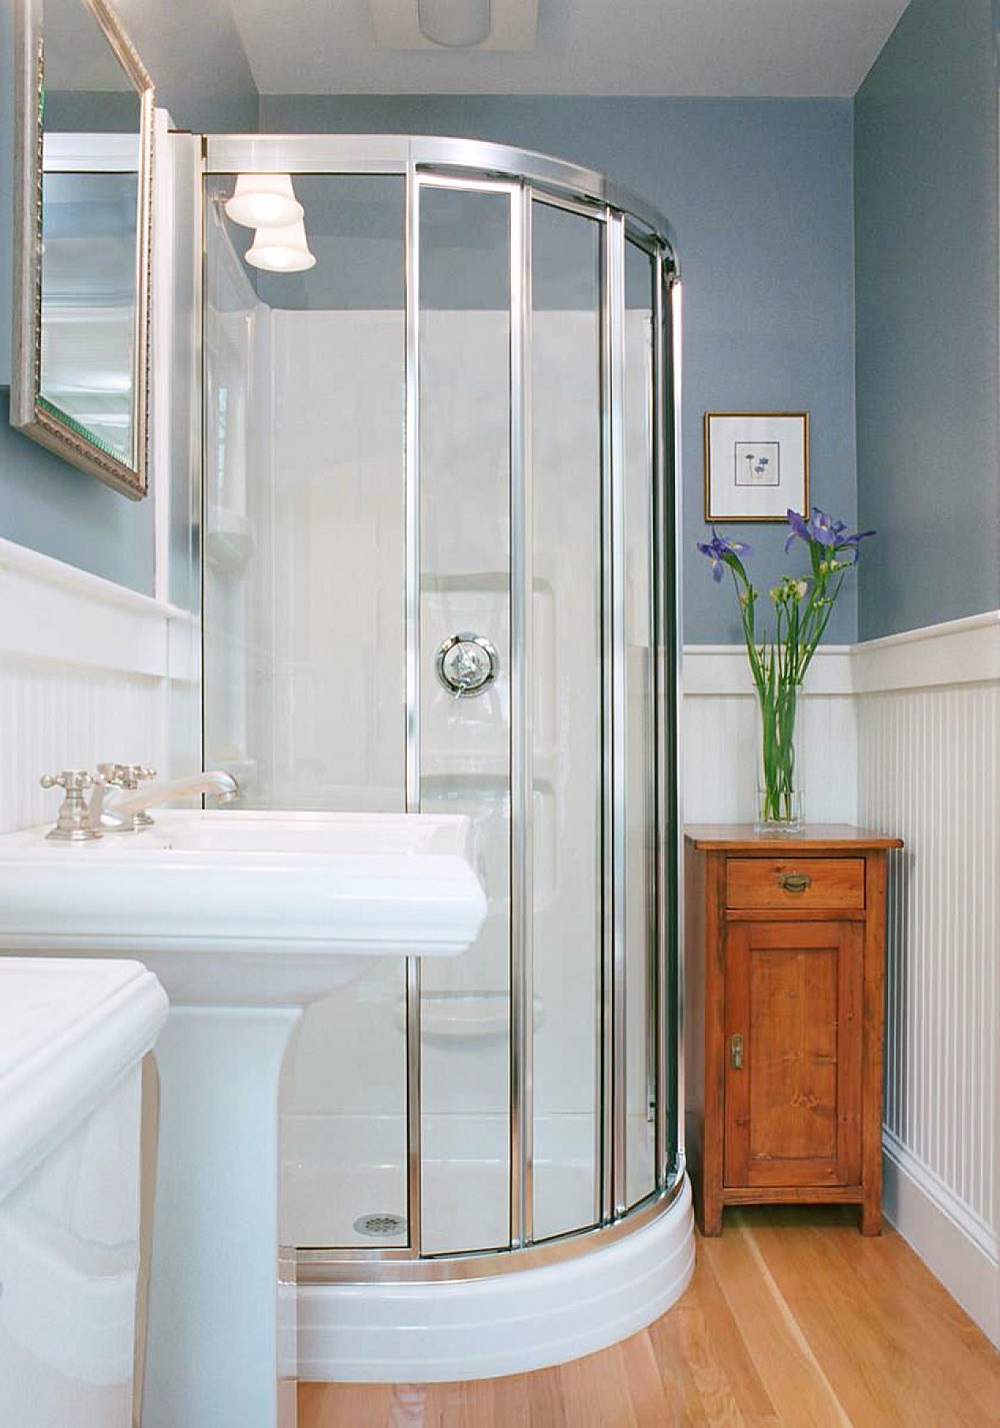 wb18 How you can take full advantage of these wainscoting bathroom ideas